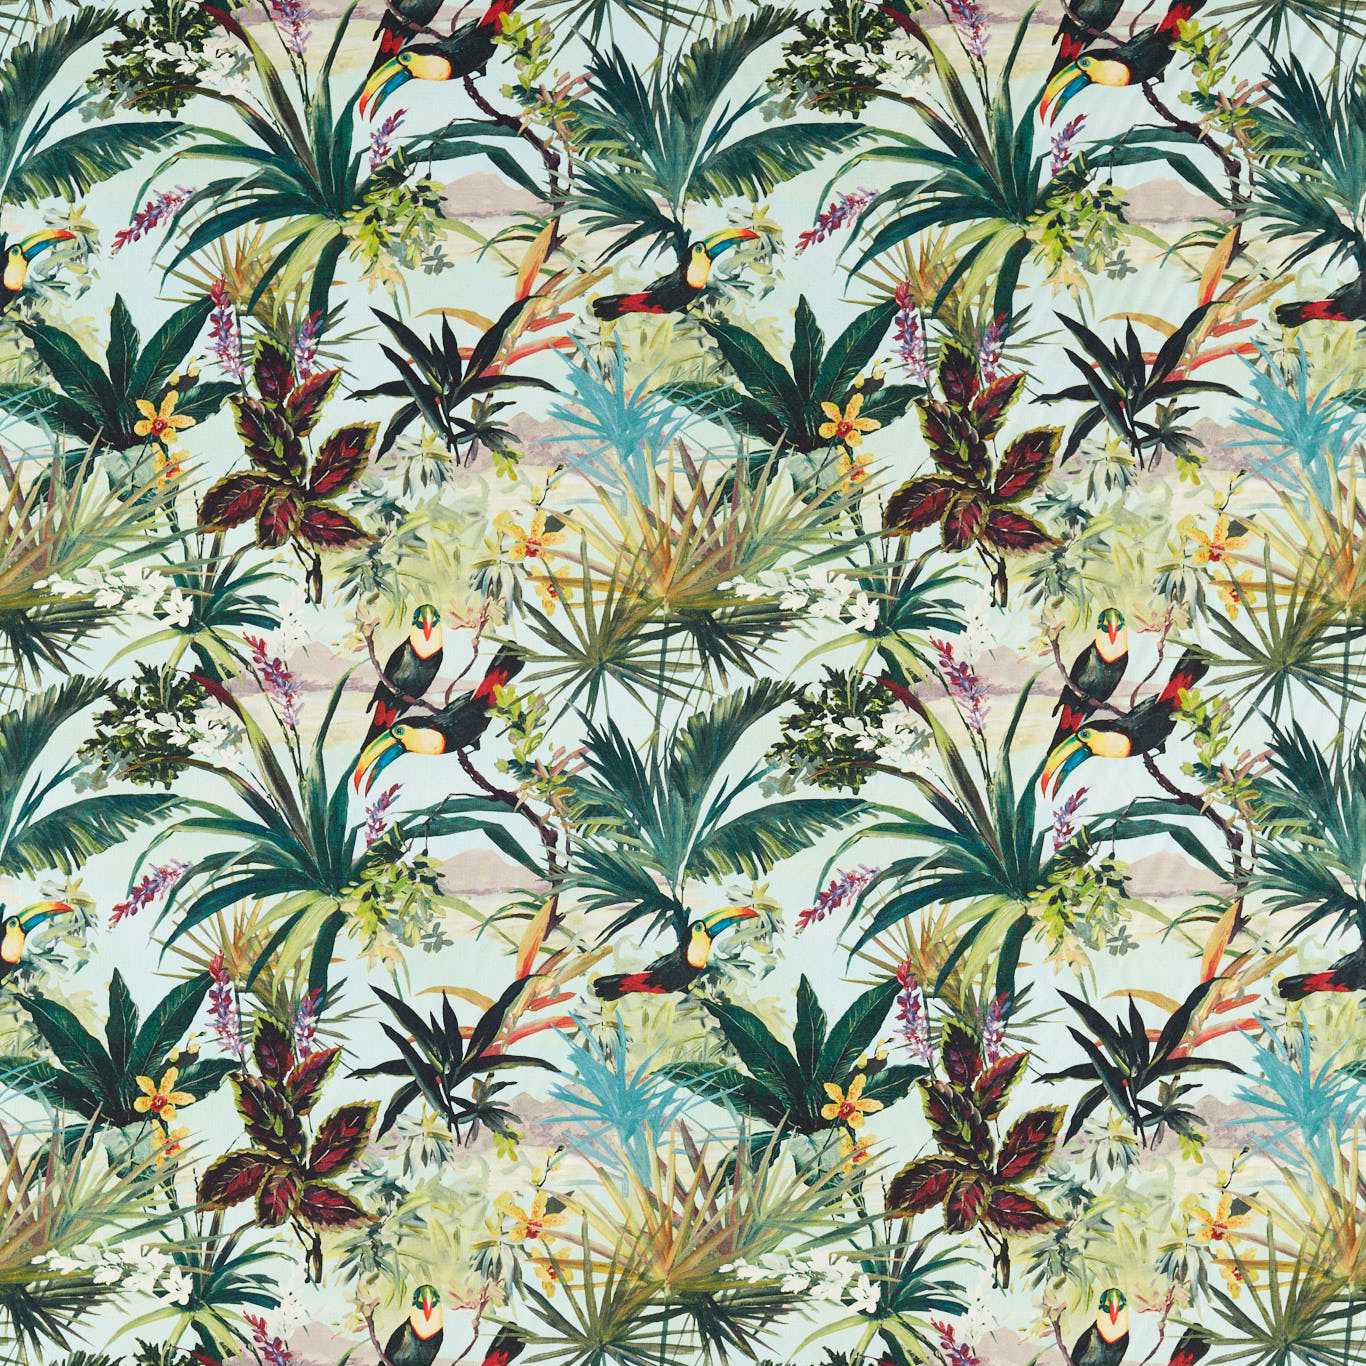 Toucan Sky Fabric by CNC